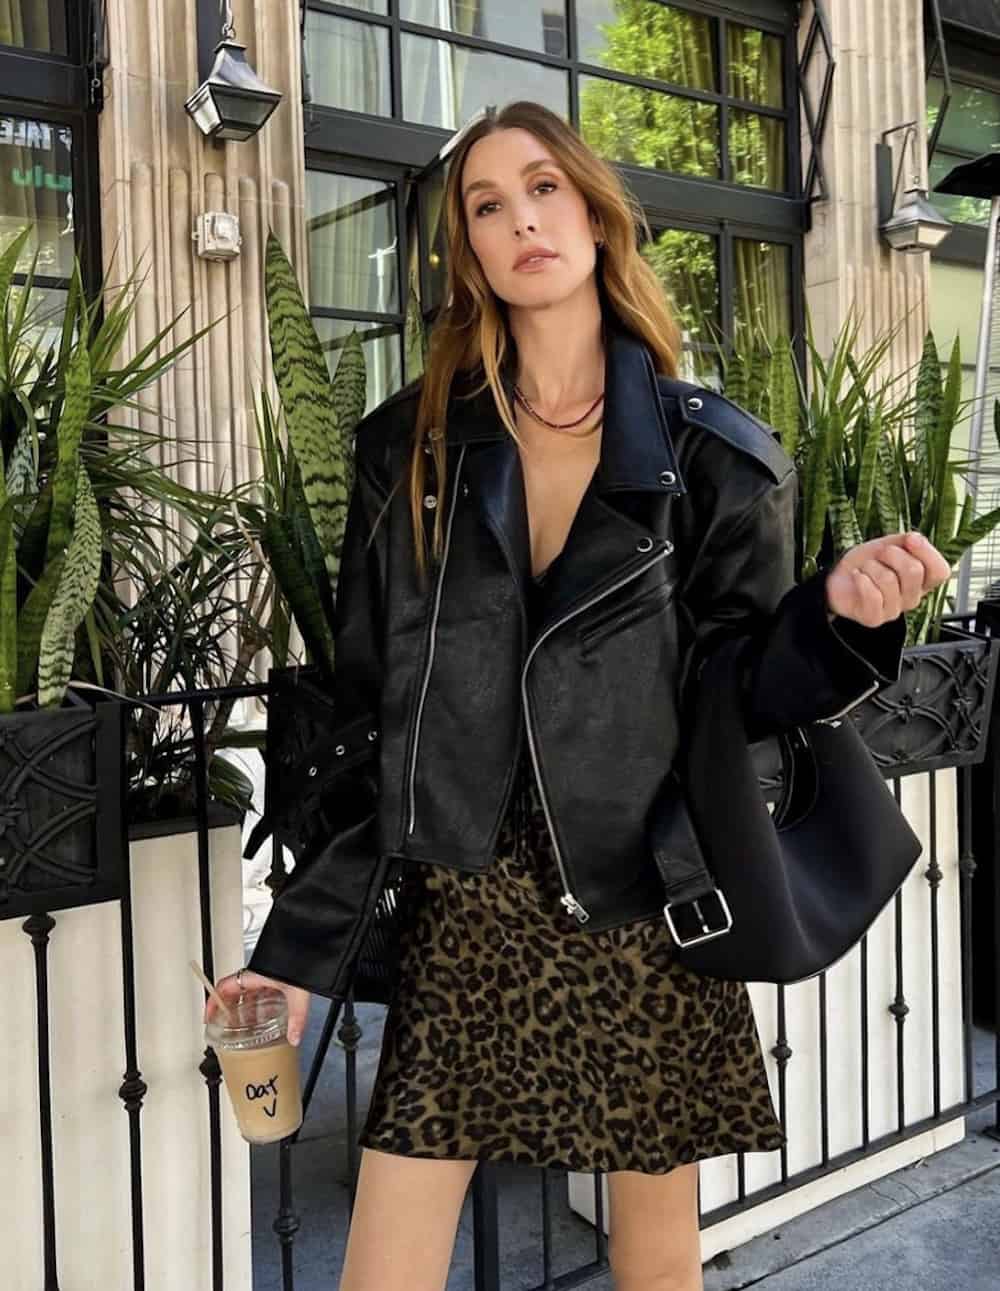 Woman wearing an animal print skirt and a black leather jacket.